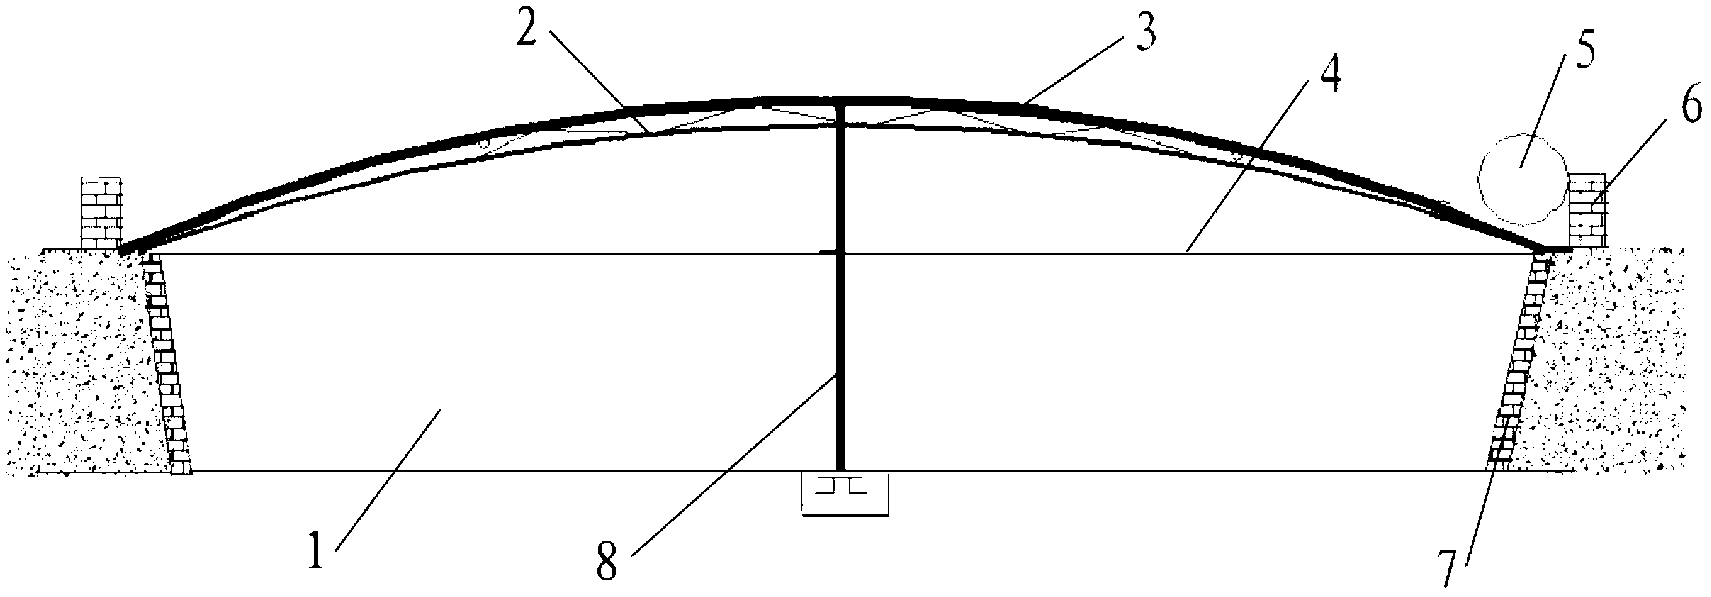 Groove-type solar greenhouse and method for constructing same